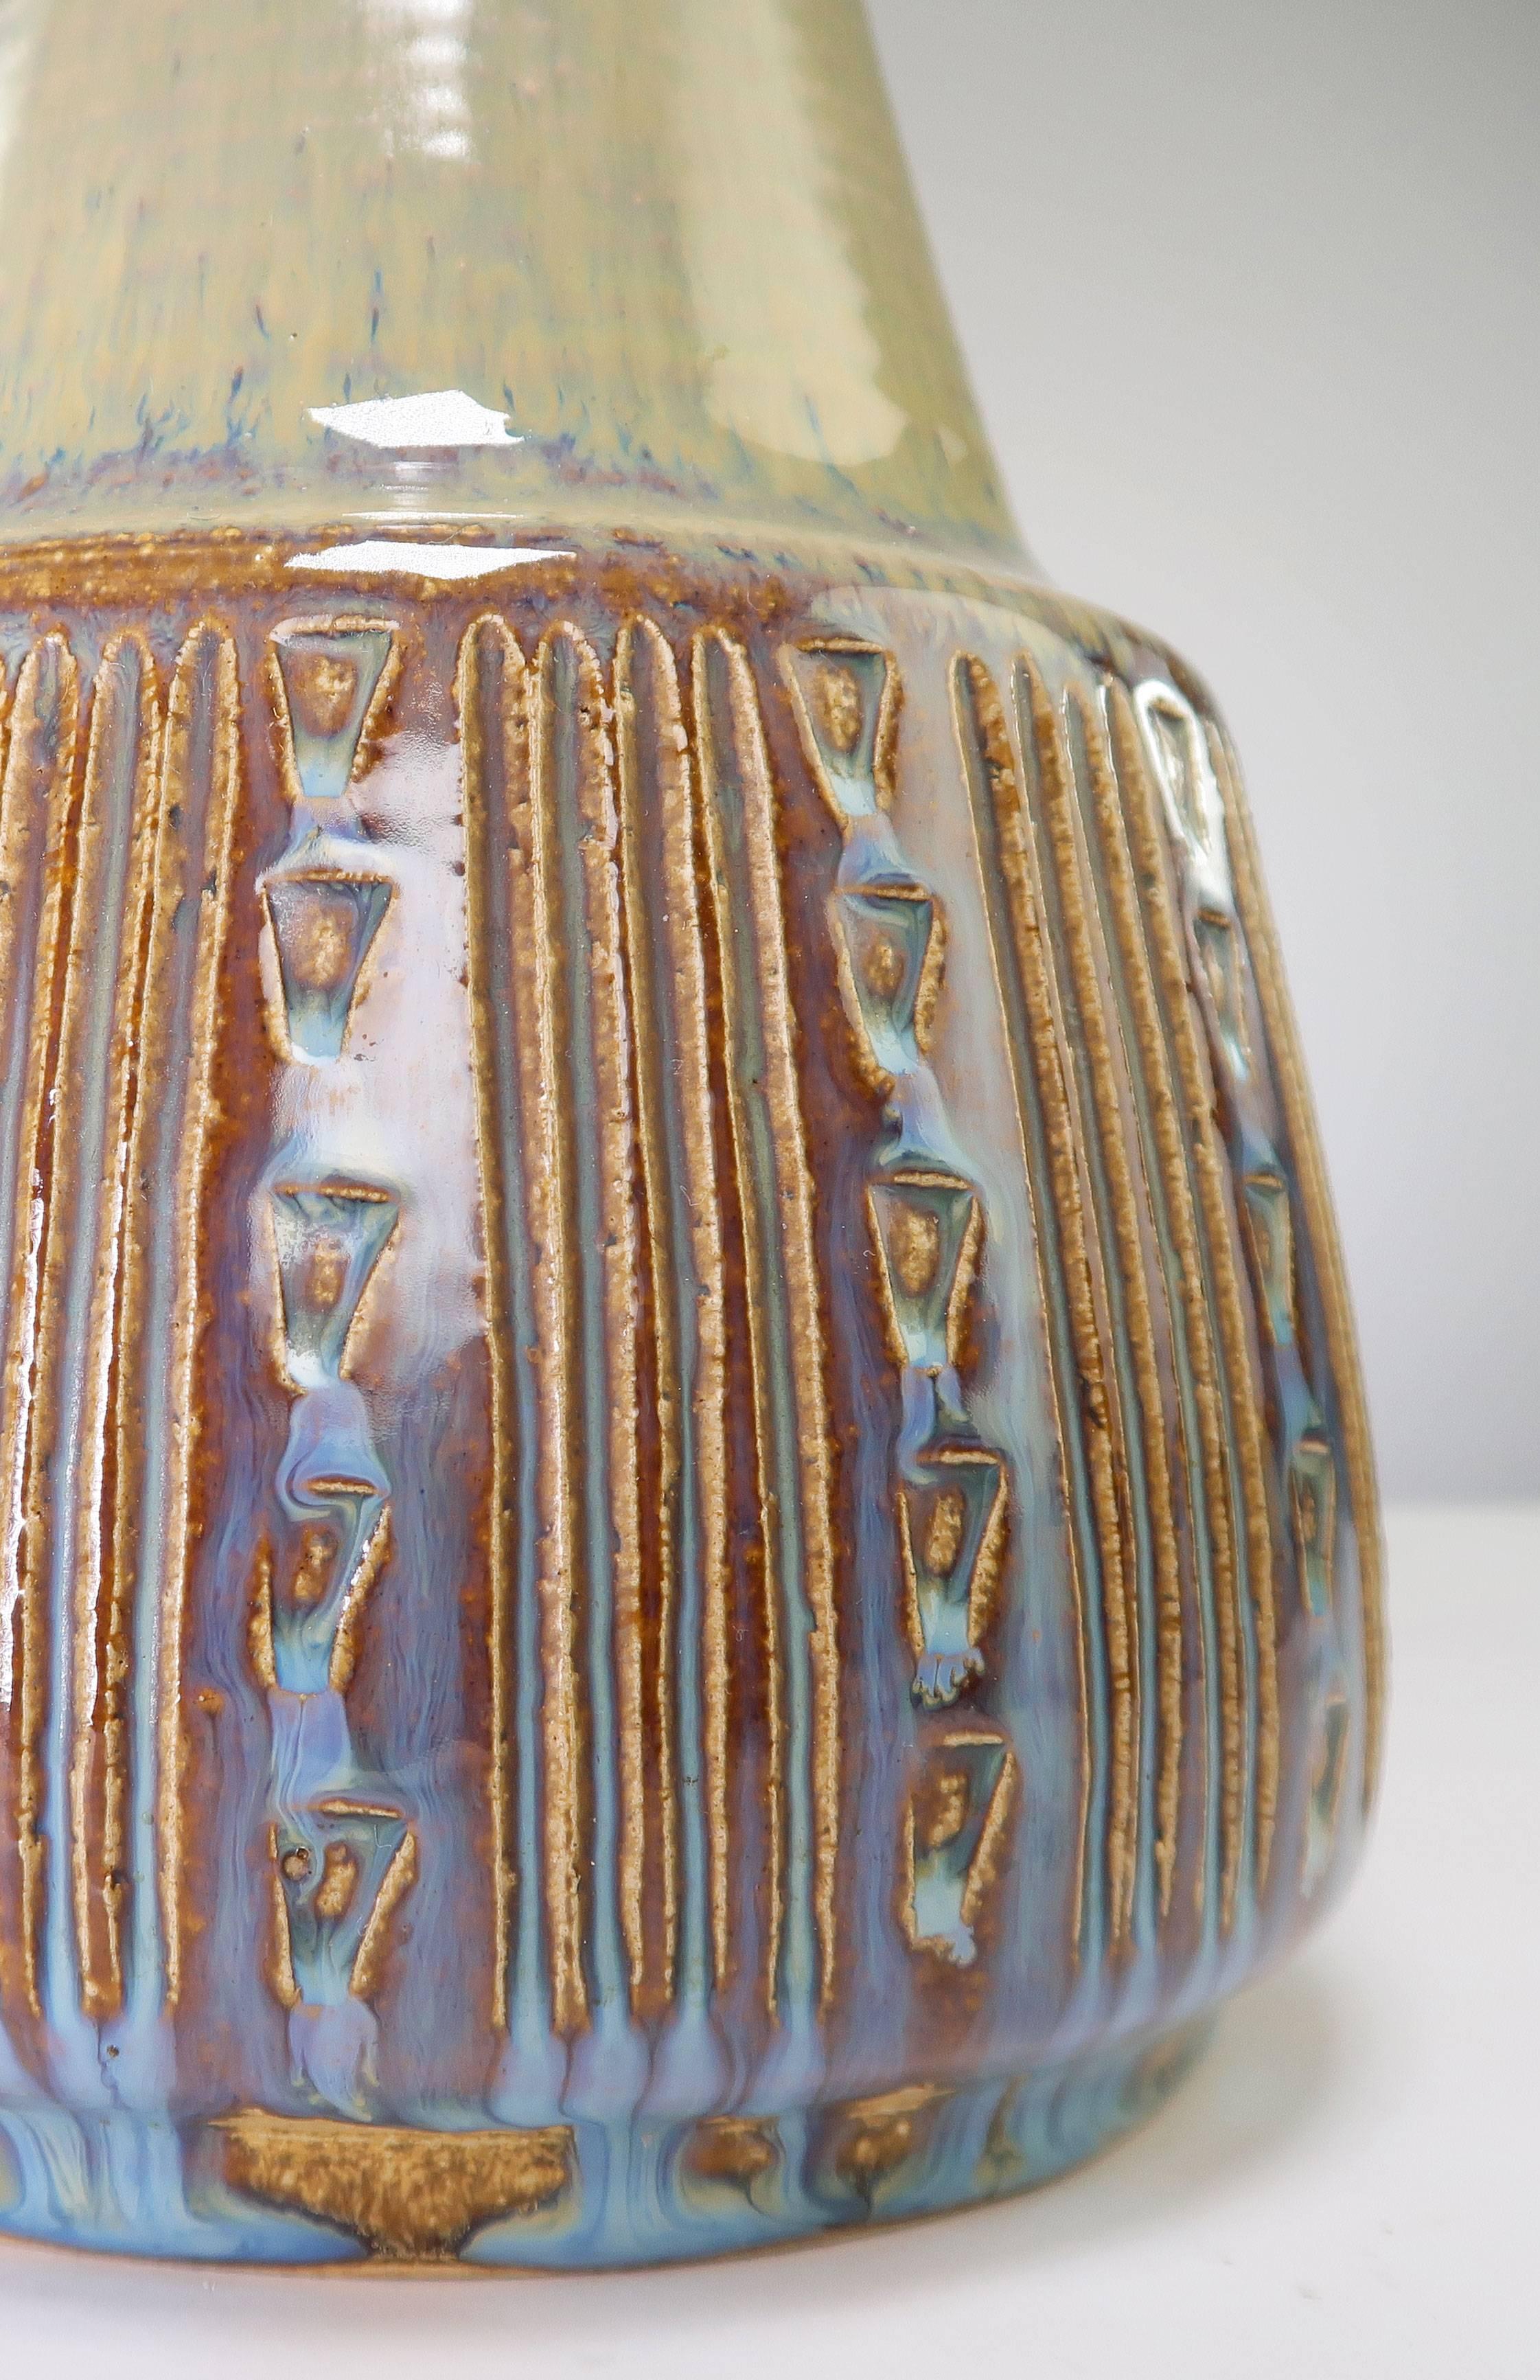 Danish Mid-Century Modern handmade and hand decorated stoneware table lamp. Glazed in light olive green, golden brown and bright blue with a South American inspired geometric pattern on the belly. Manufactured at Soholm Pottery on the Danish island